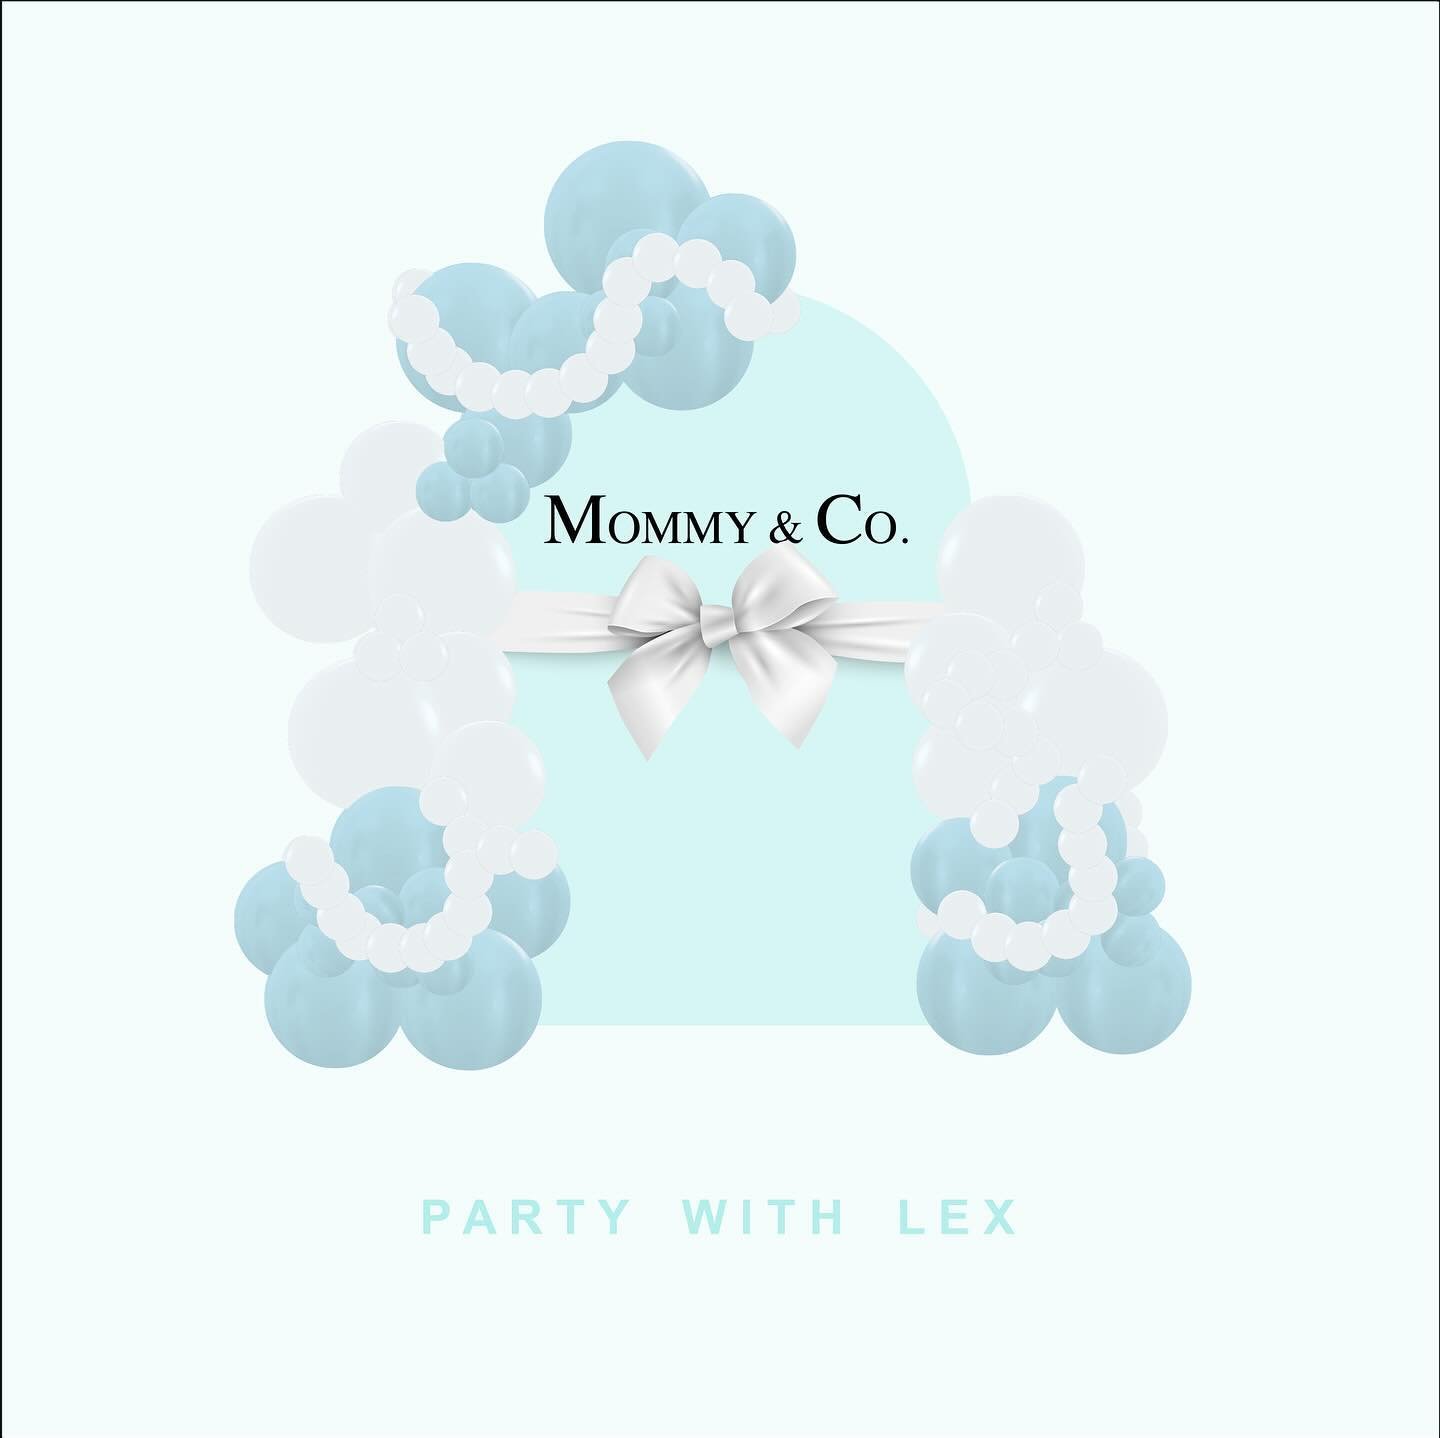 A &ldquo;Tiffany&rdquo; Mother&rsquo;s Day themed brunch! Before &amp; After&hellip; from concept to reality 🩵✨

✨ Event Design + Balloons @partywithlex 
✨ Venue &amp; Catering @thelegendscc 
✨ Photography @unrulyblooms.co 
&bull;
&bull;
&bull;
&bul